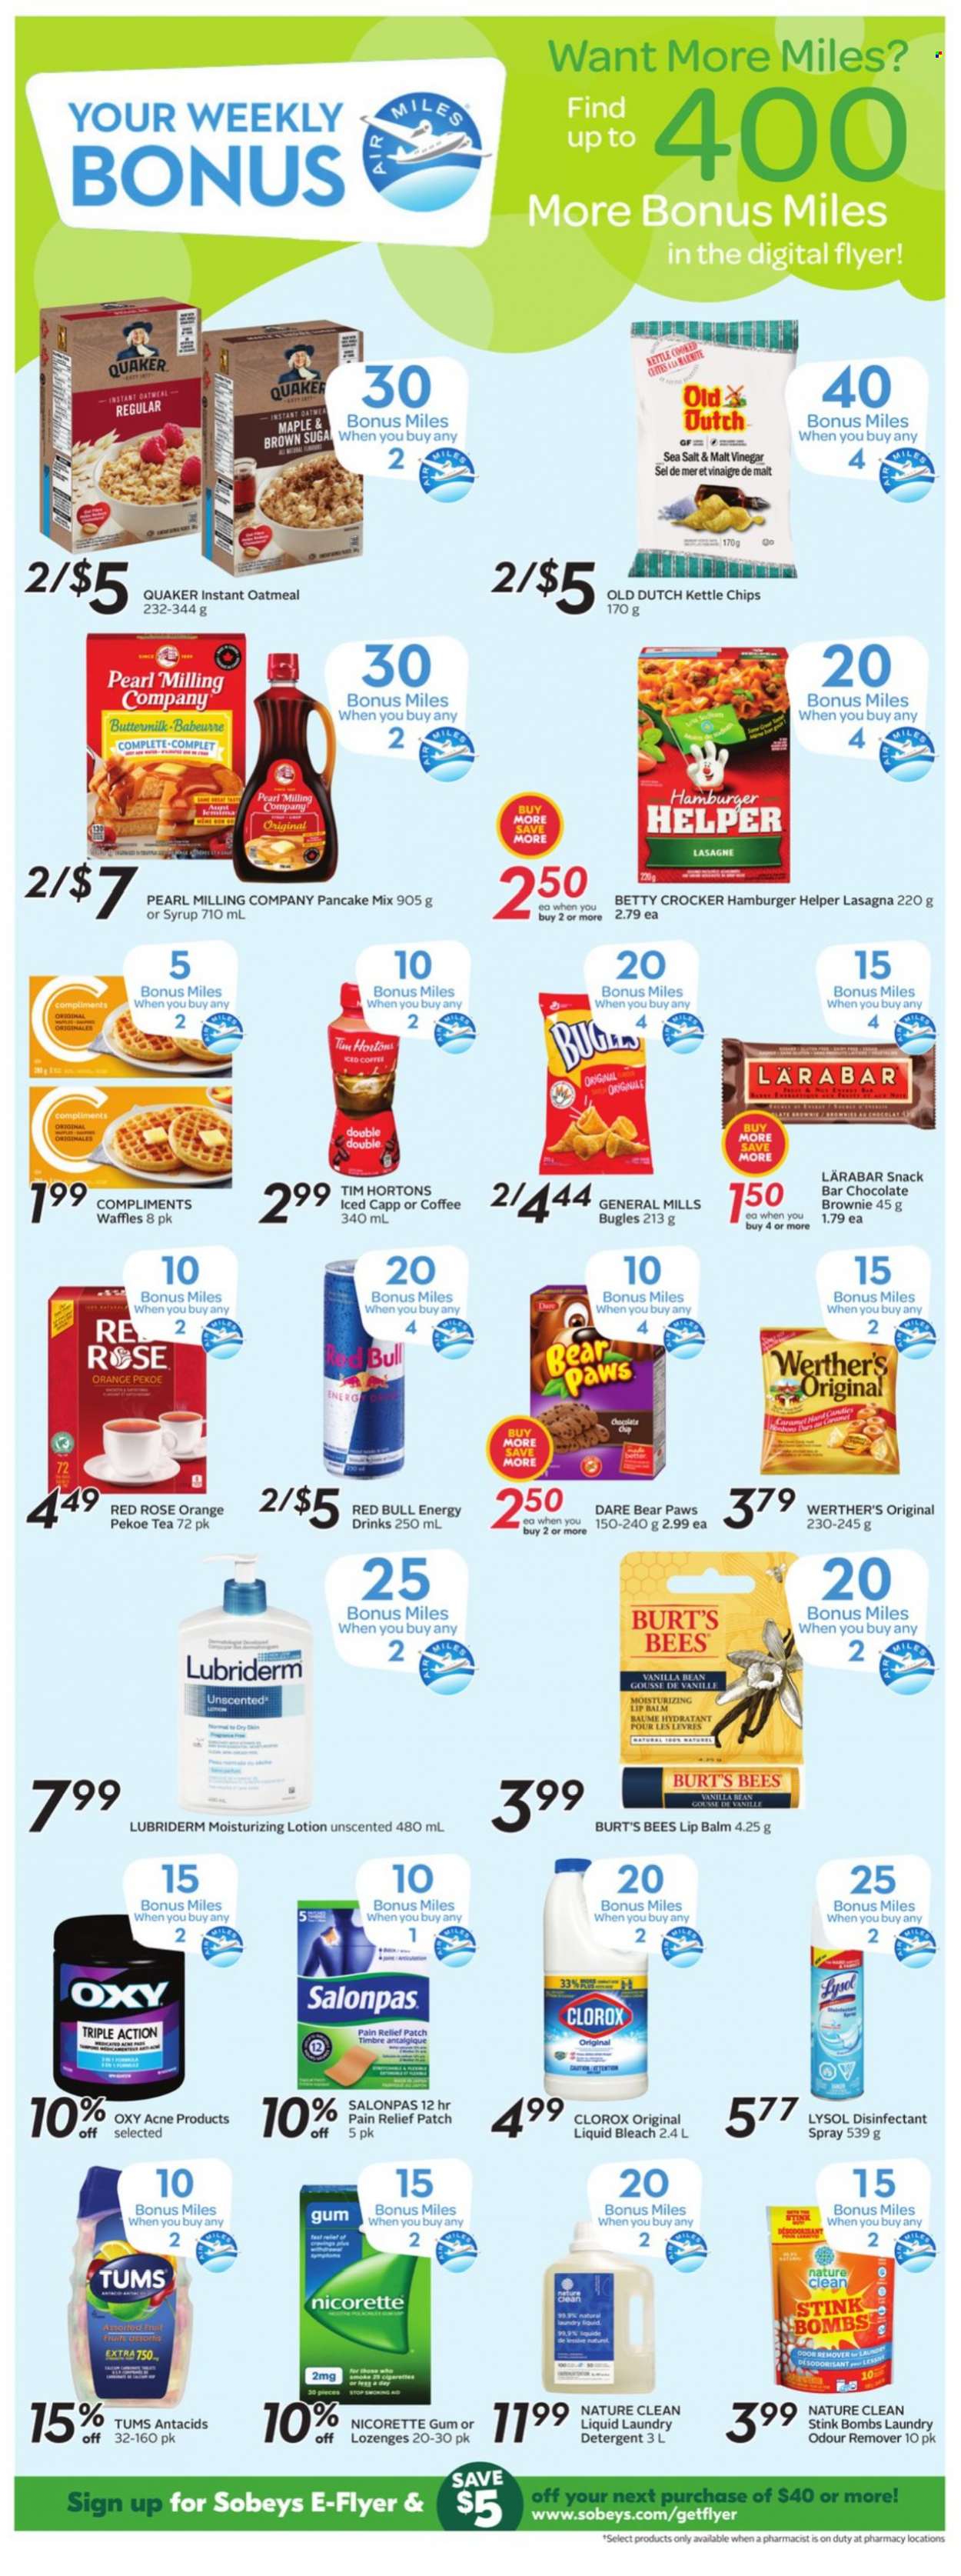 thumbnail - Sobeys Flyer - September 09, 2021 - September 15, 2021 - Sales products - brownies, waffles, pancakes, Quaker, lasagna meal, buttermilk, chocolate, snack, snack bar, oatmeal, energy drink, Red Bull, tea, coffee, wine, rosé wine, bleach, Lysol, Clorox, laundry detergent, lip balm, body lotion, Lubriderm, antibacterial spray, Paws, pain relief, Nicorette, Nicorette Gum, detergent, chips, oranges, desinfection. Page 11.